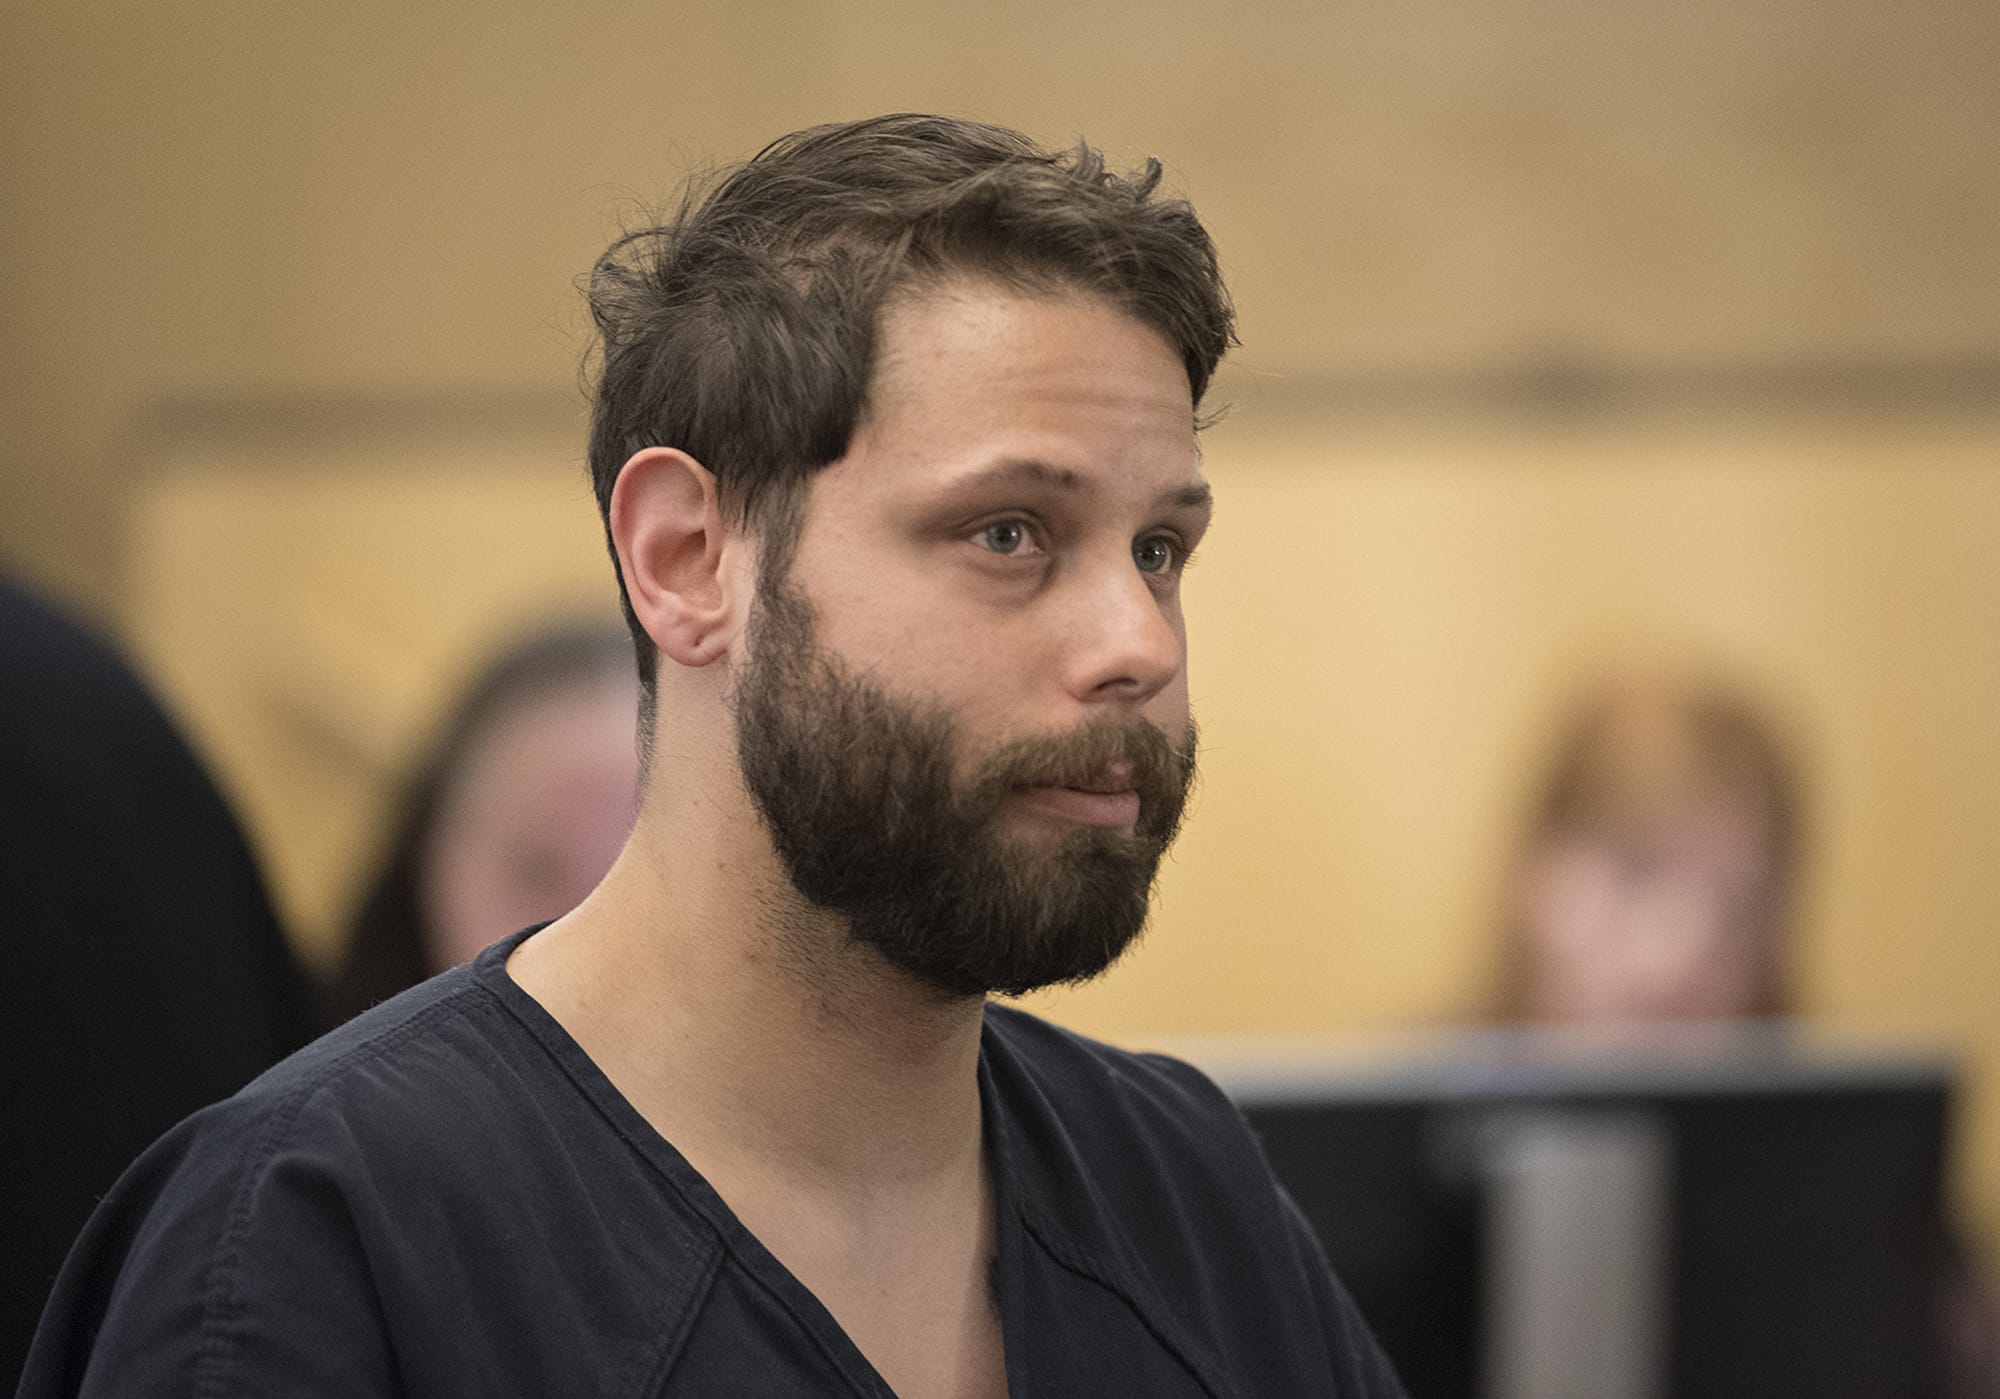 Zackary Abel makes a first appearance on suspicion of voyeurism in Clark County Superior Court on June 9, 2019. Abel, a Crunch Fitness employee, is accused of recording a gym member with his cellphone as she tanned in the nude.